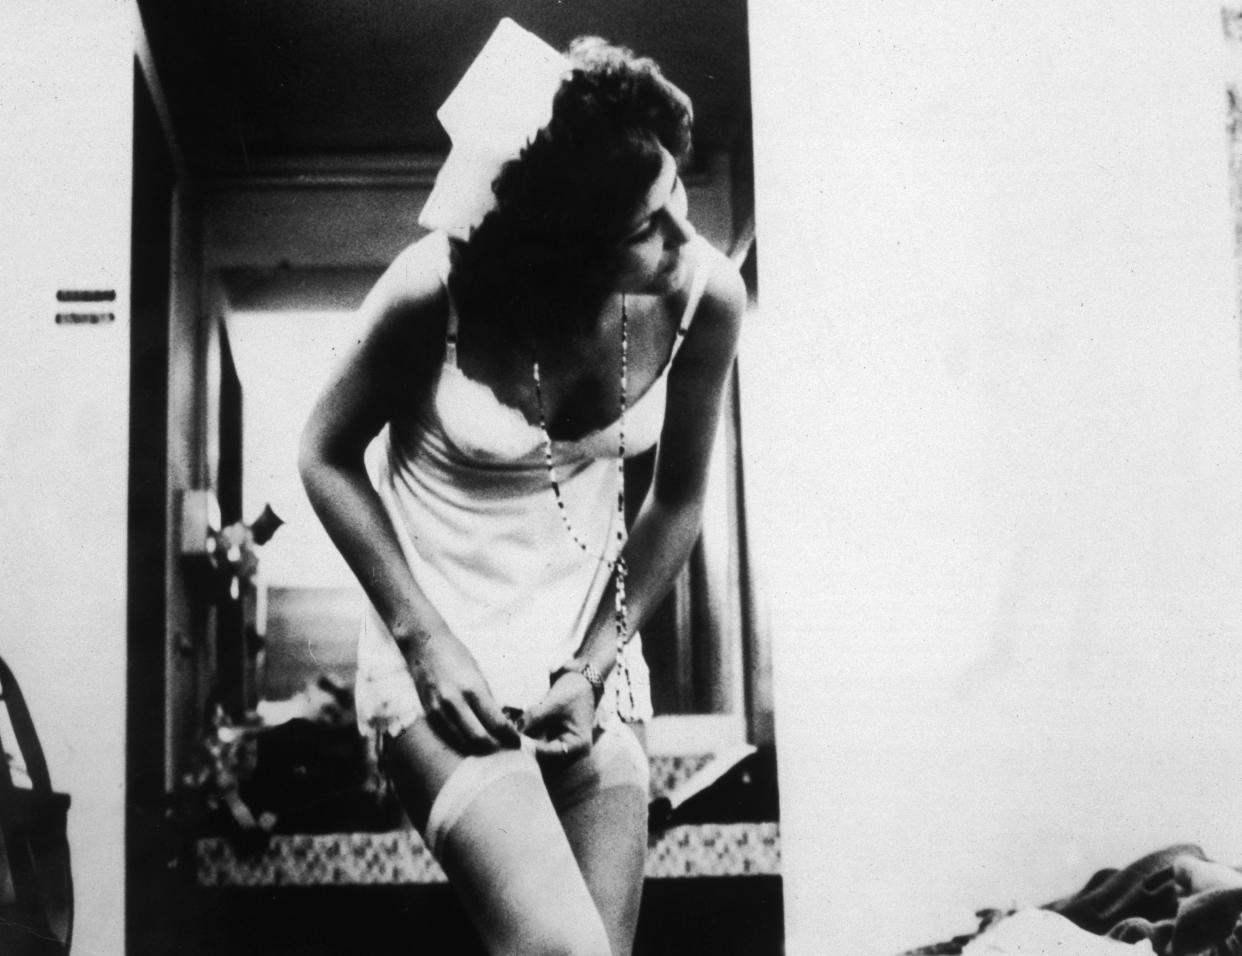 1972, American actor Linda Lovelace (1949 - 2002), as Herself, adjusts her garter in a still from director Gerard Damiano pornographic film 'Deep Throat'. (Photo by Getty Images/Getty Images)